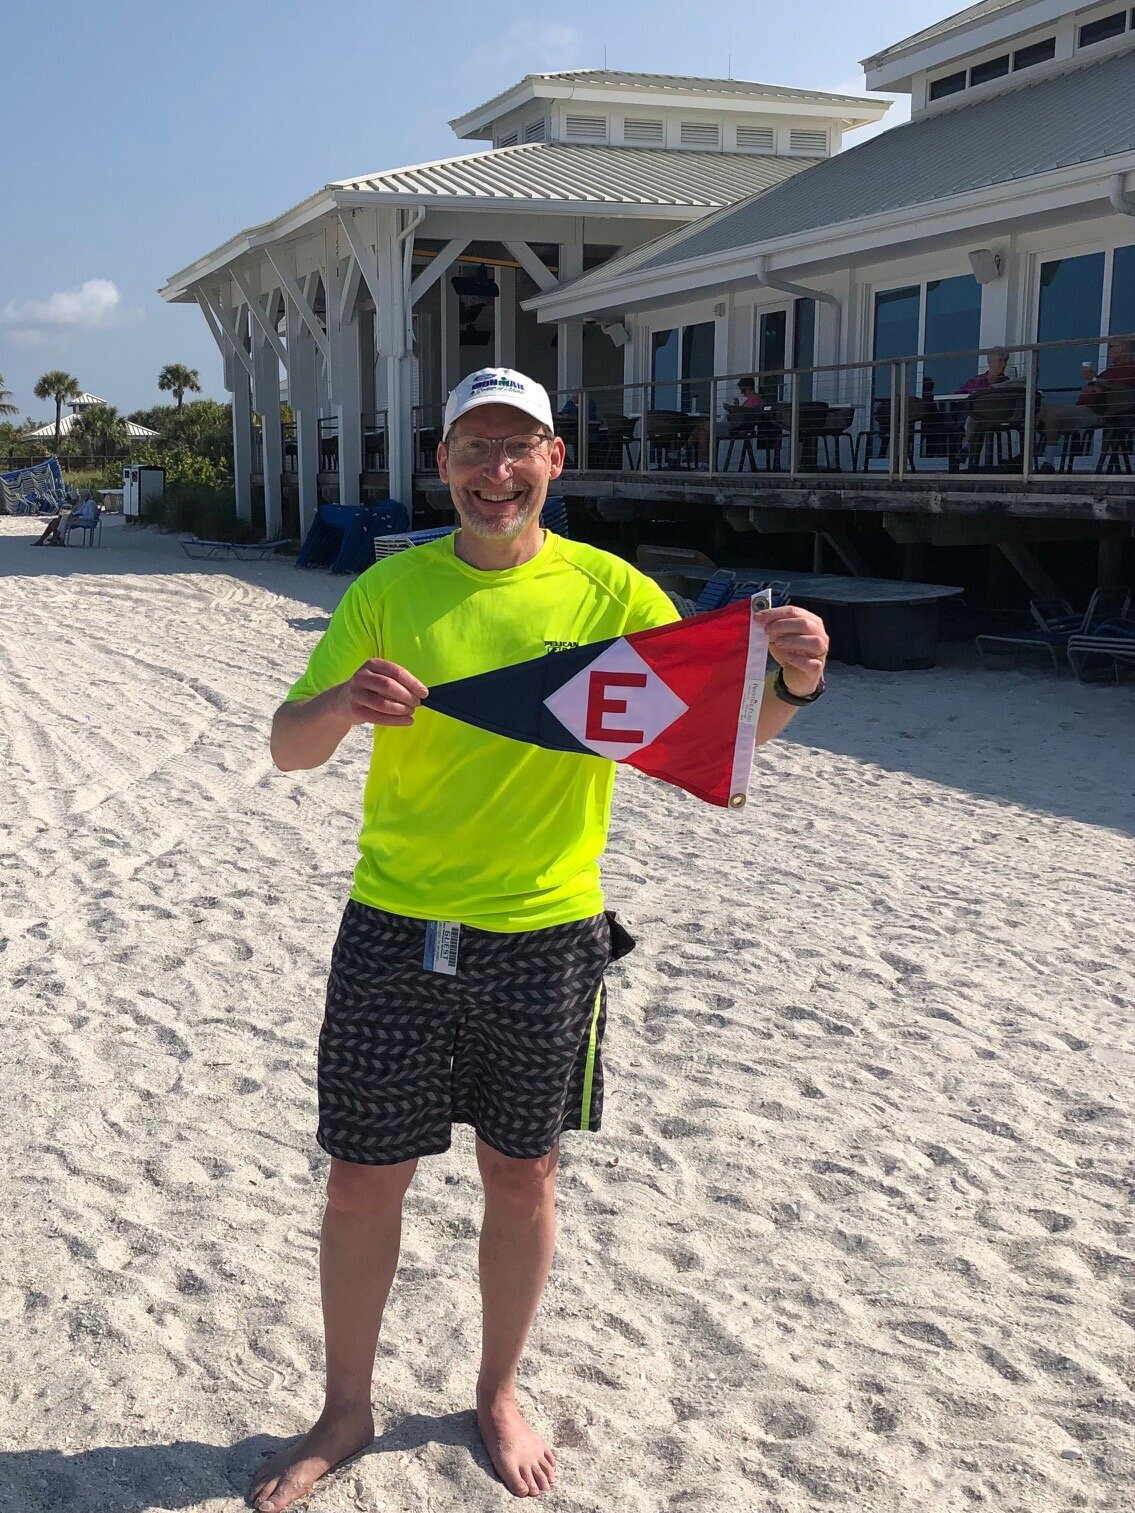  Eric shows his colors on the beach at Pelican Bay Yacht Club in Naples, FL 